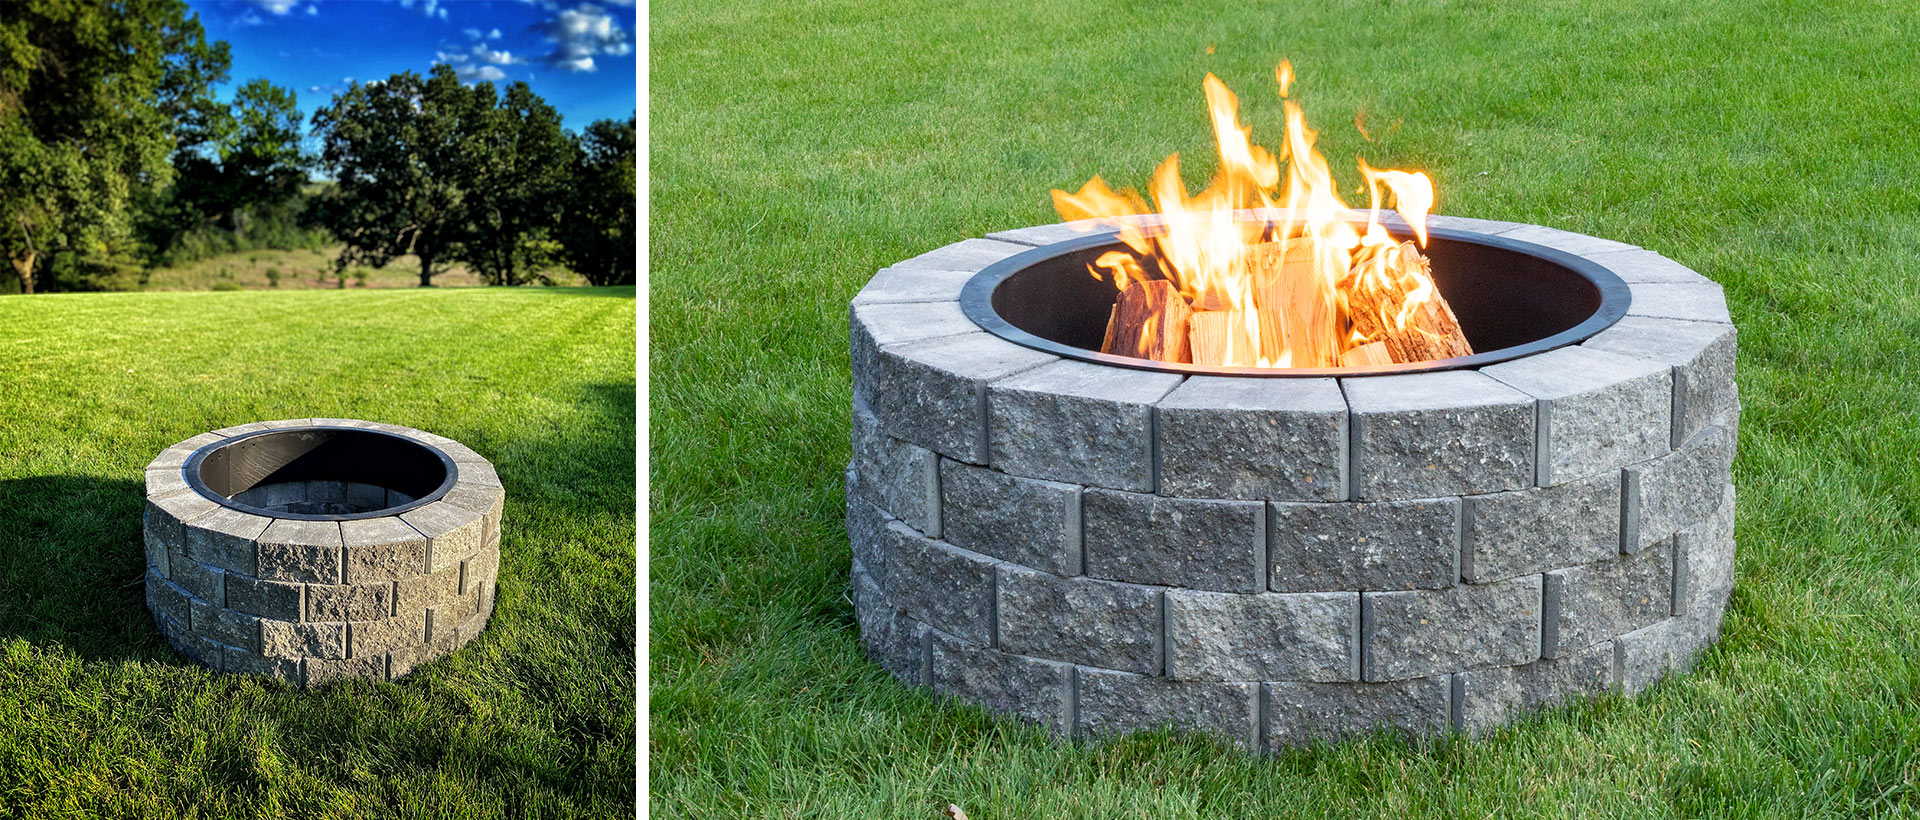 Best Price on Necessories Grand Fire Pit - Outdoor Living Kit - Patio &  Pizza Outdoor Furnishings